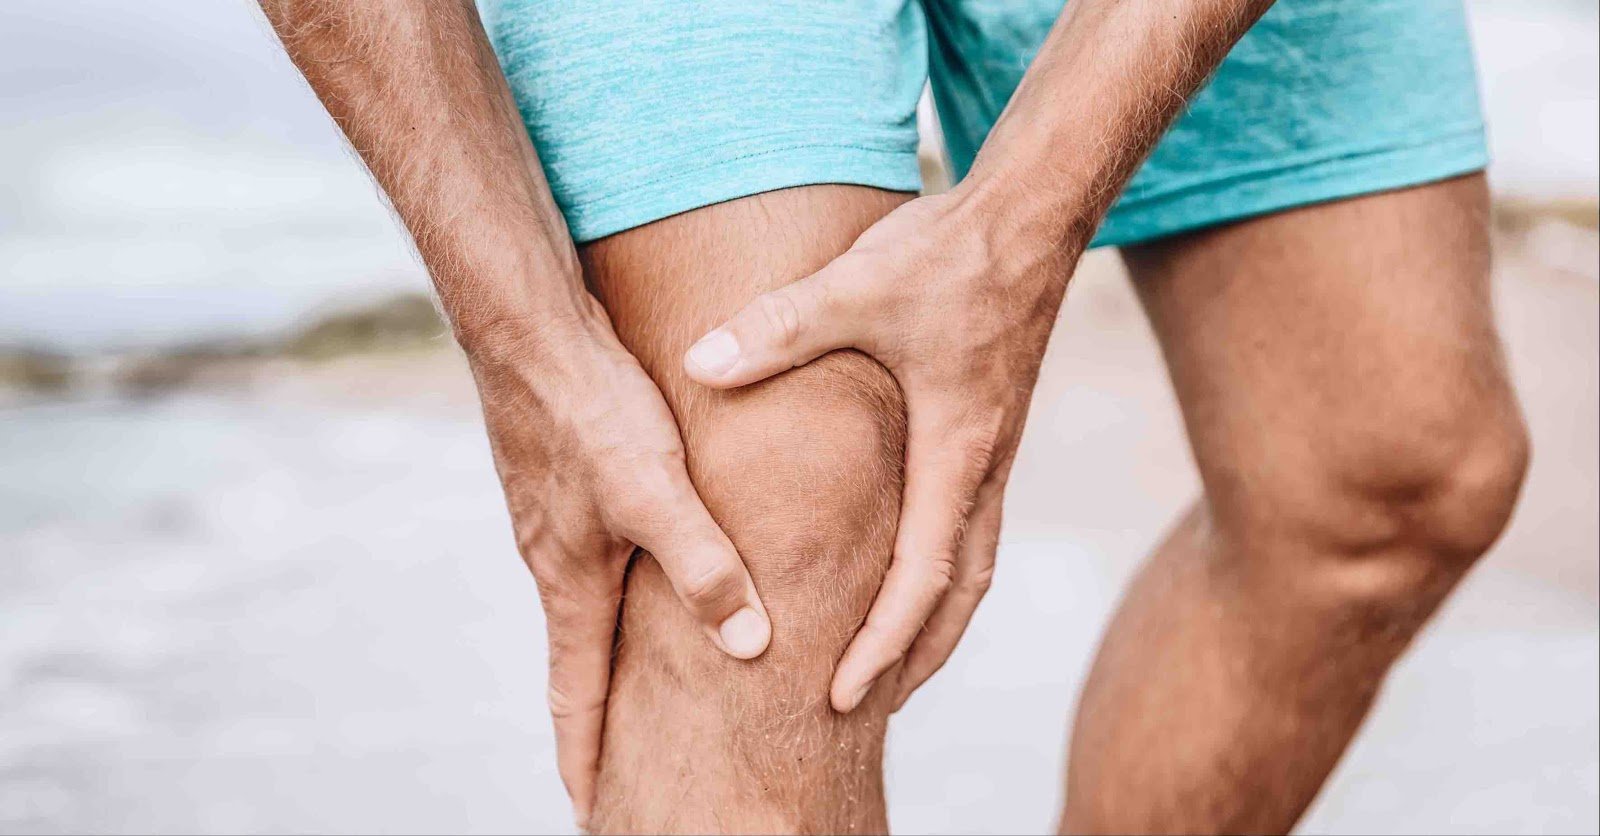 Runners Knee: Causes, Symptoms and Treatment